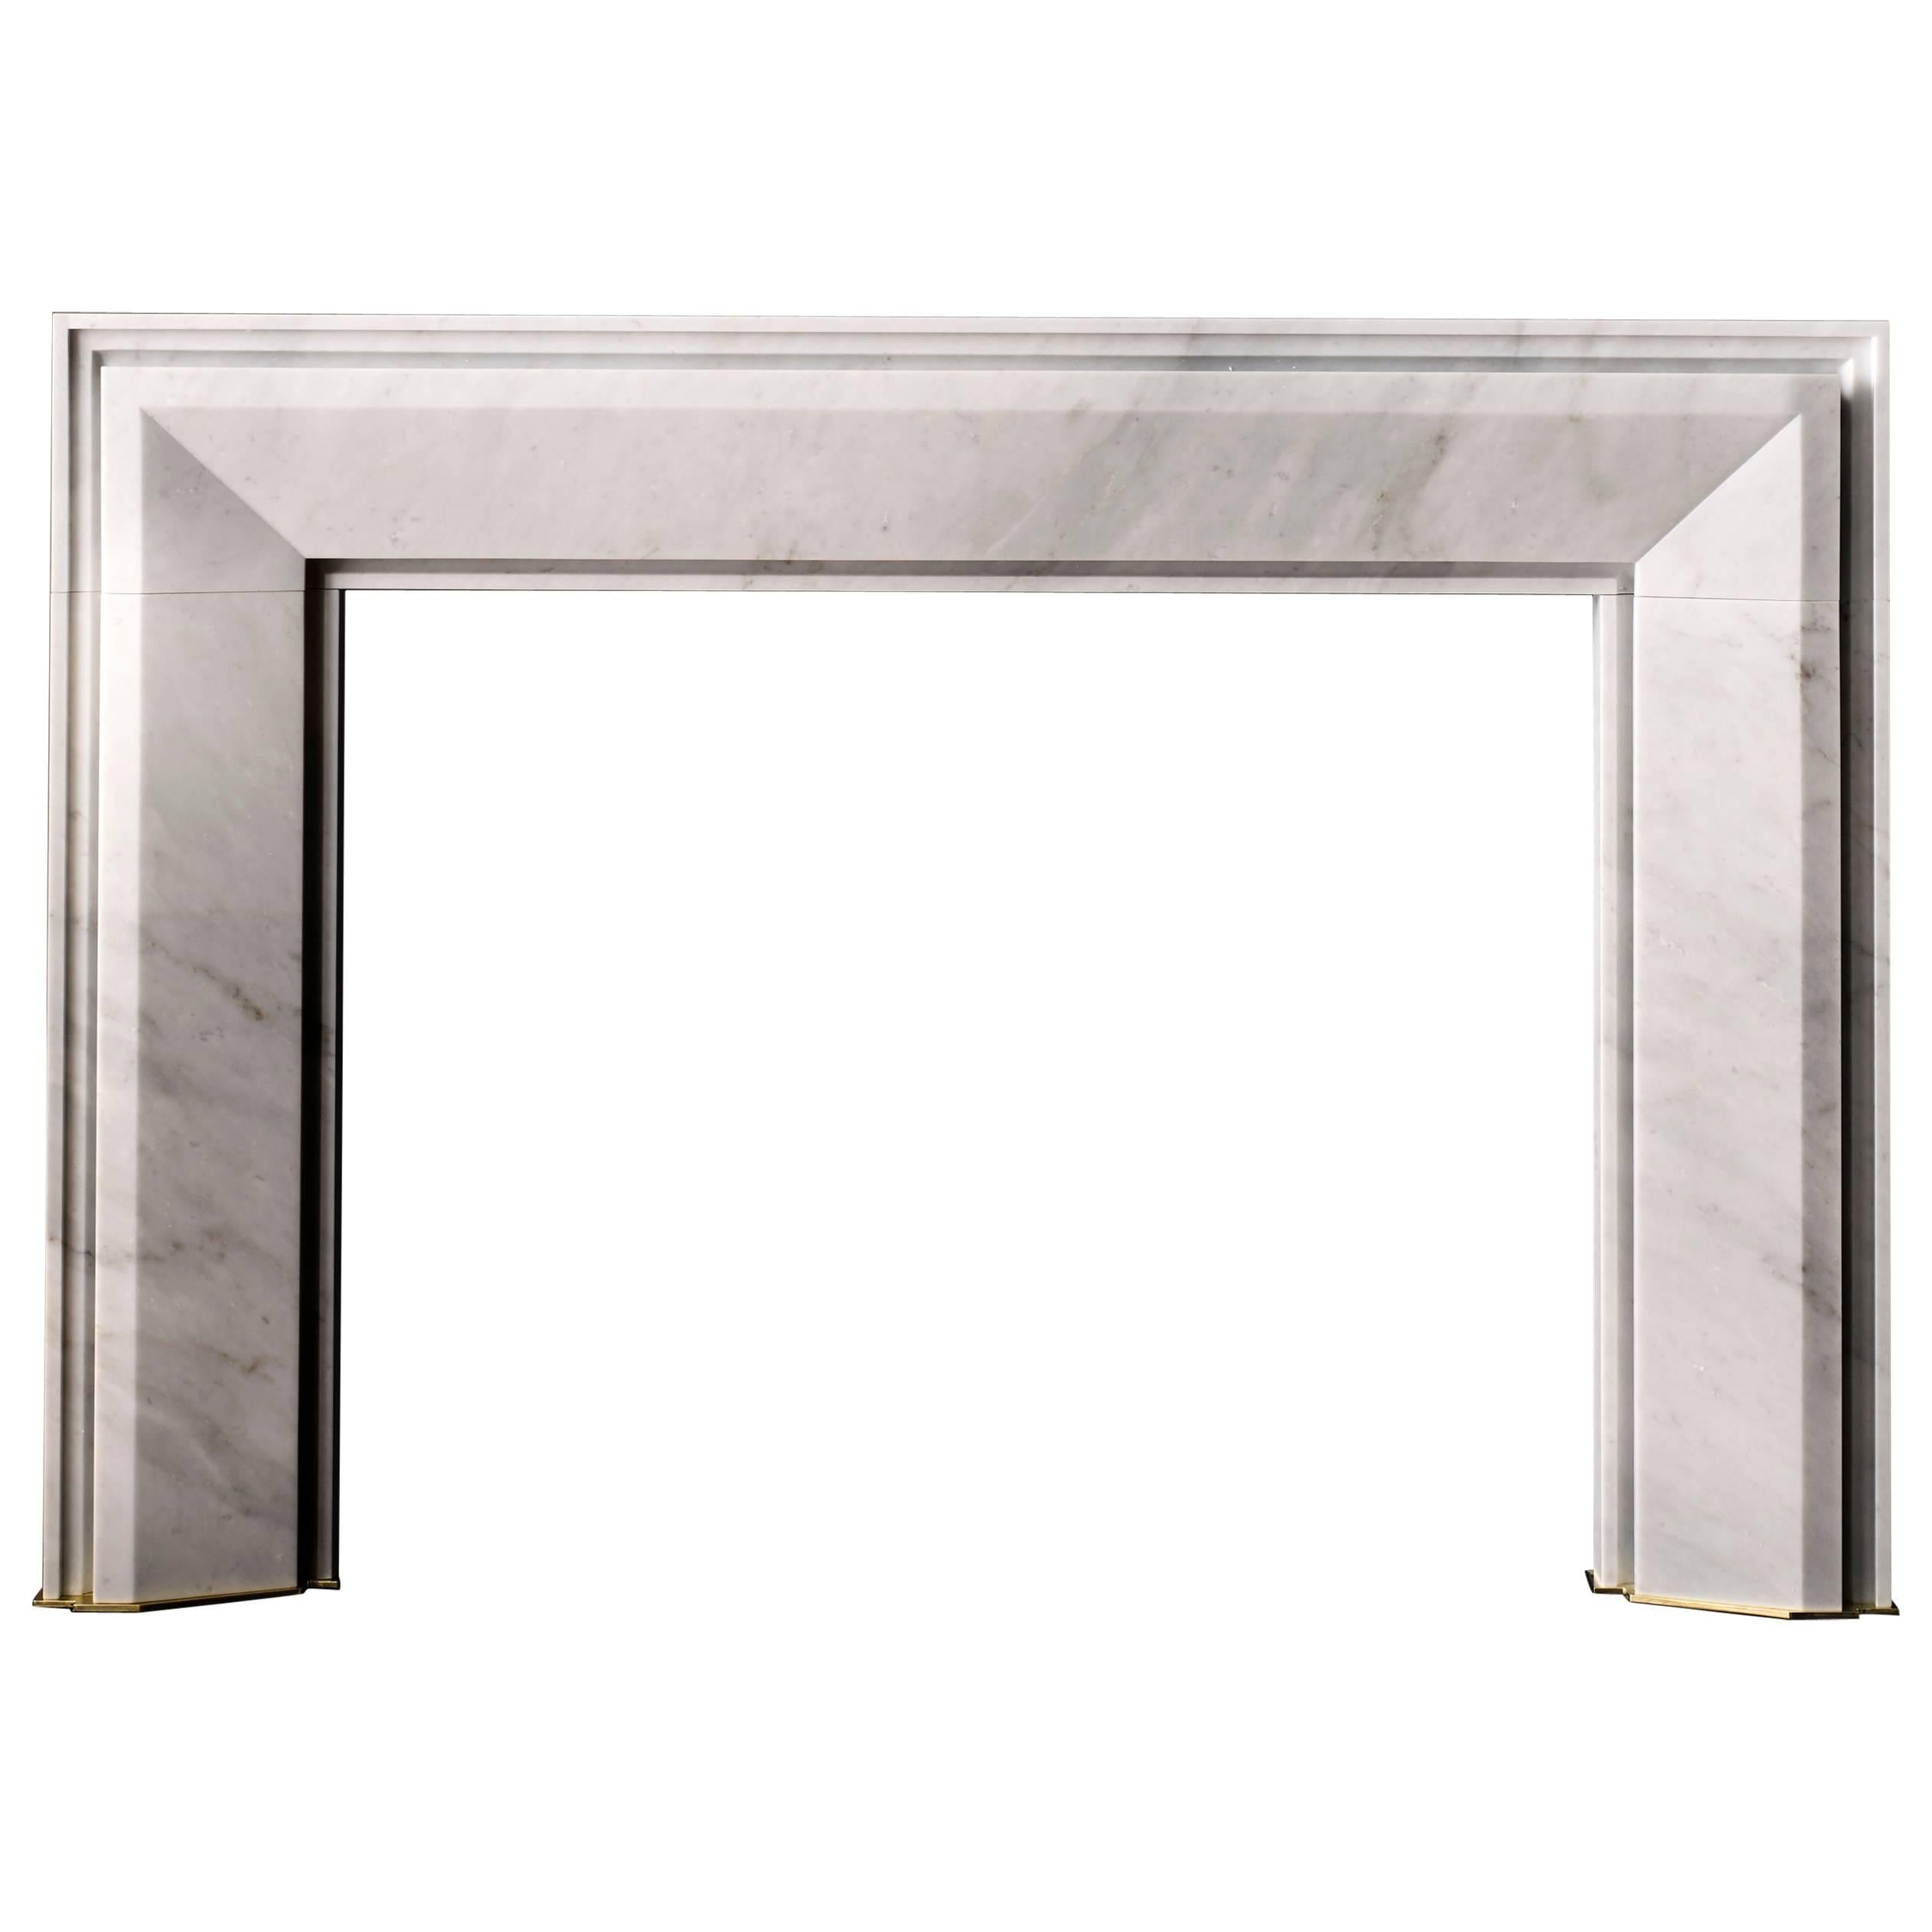 The Monroe Mantel by Pembrooke & Ives in Carrara Marble